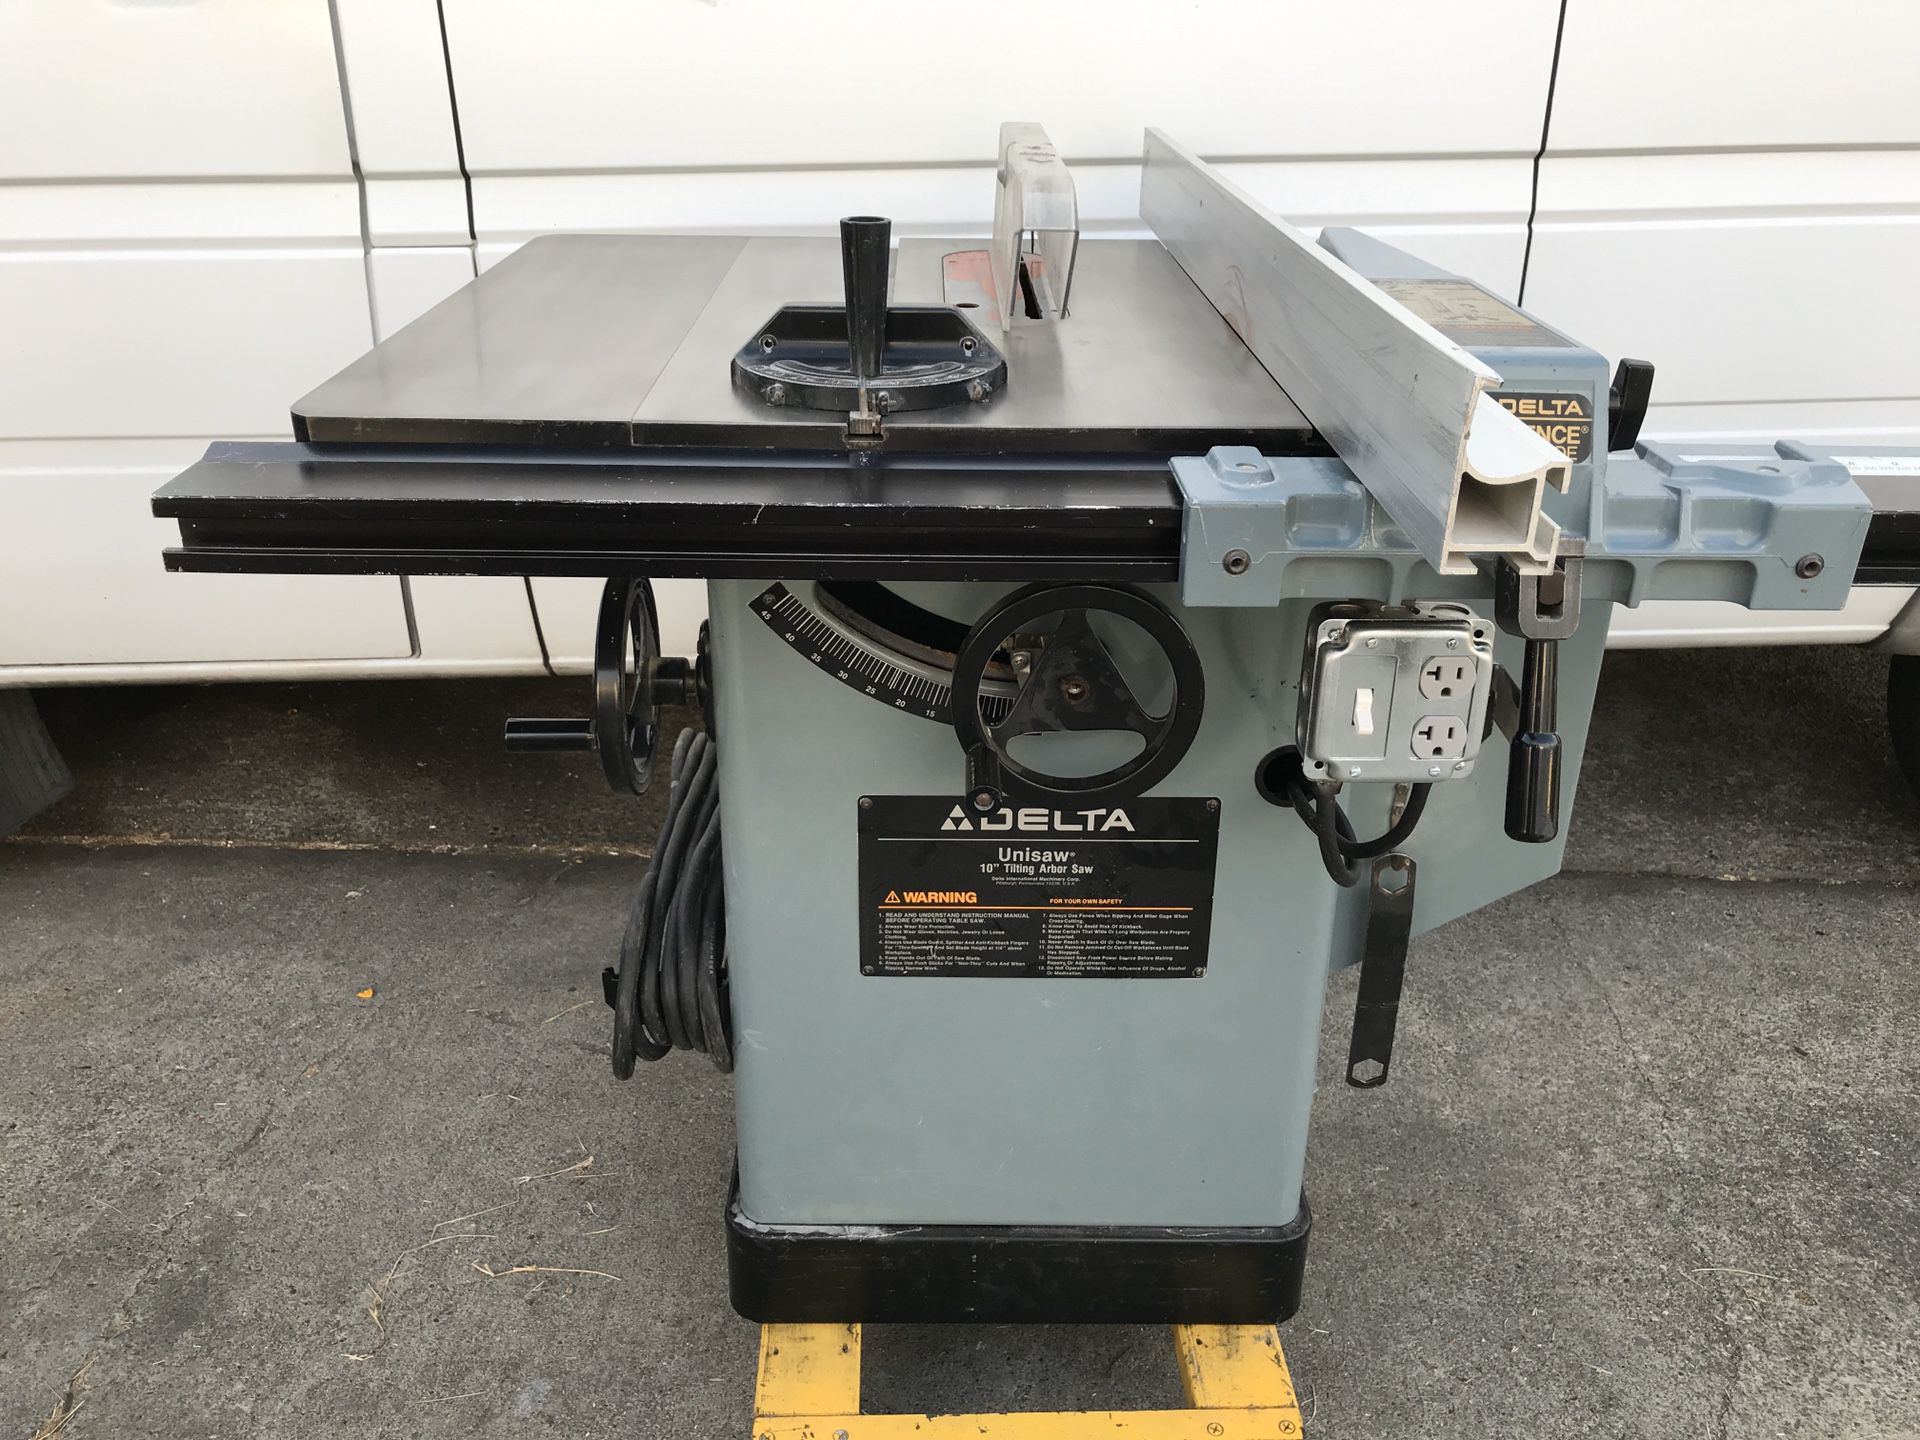 Delta Unisaw 10” Table Saw